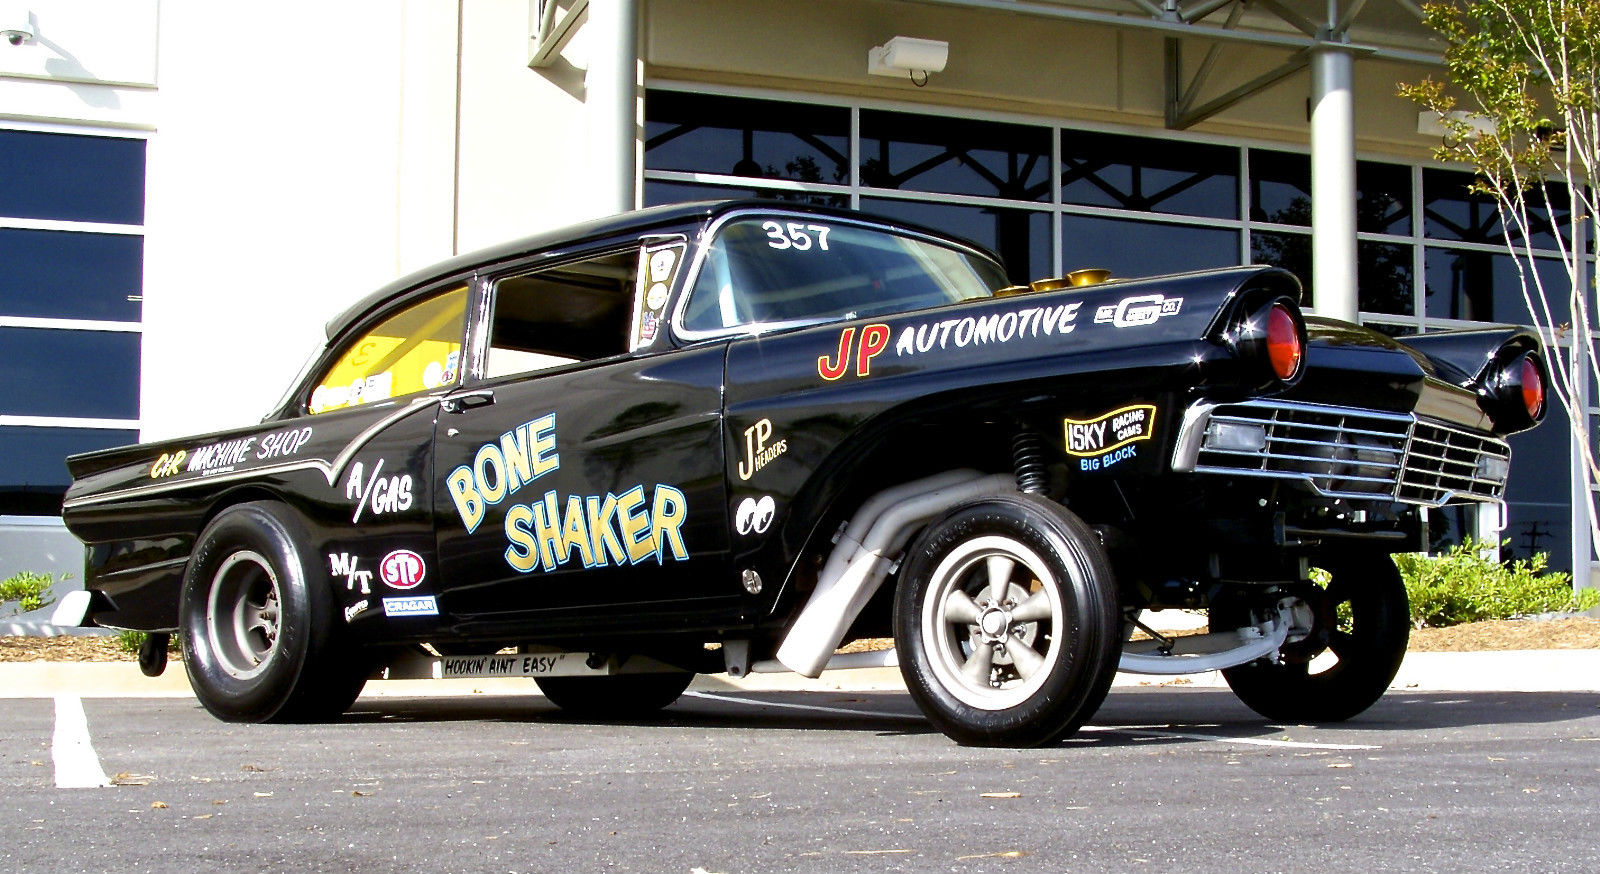 The Bone Shaker 1957 Ford Gasser Is For Sale! 